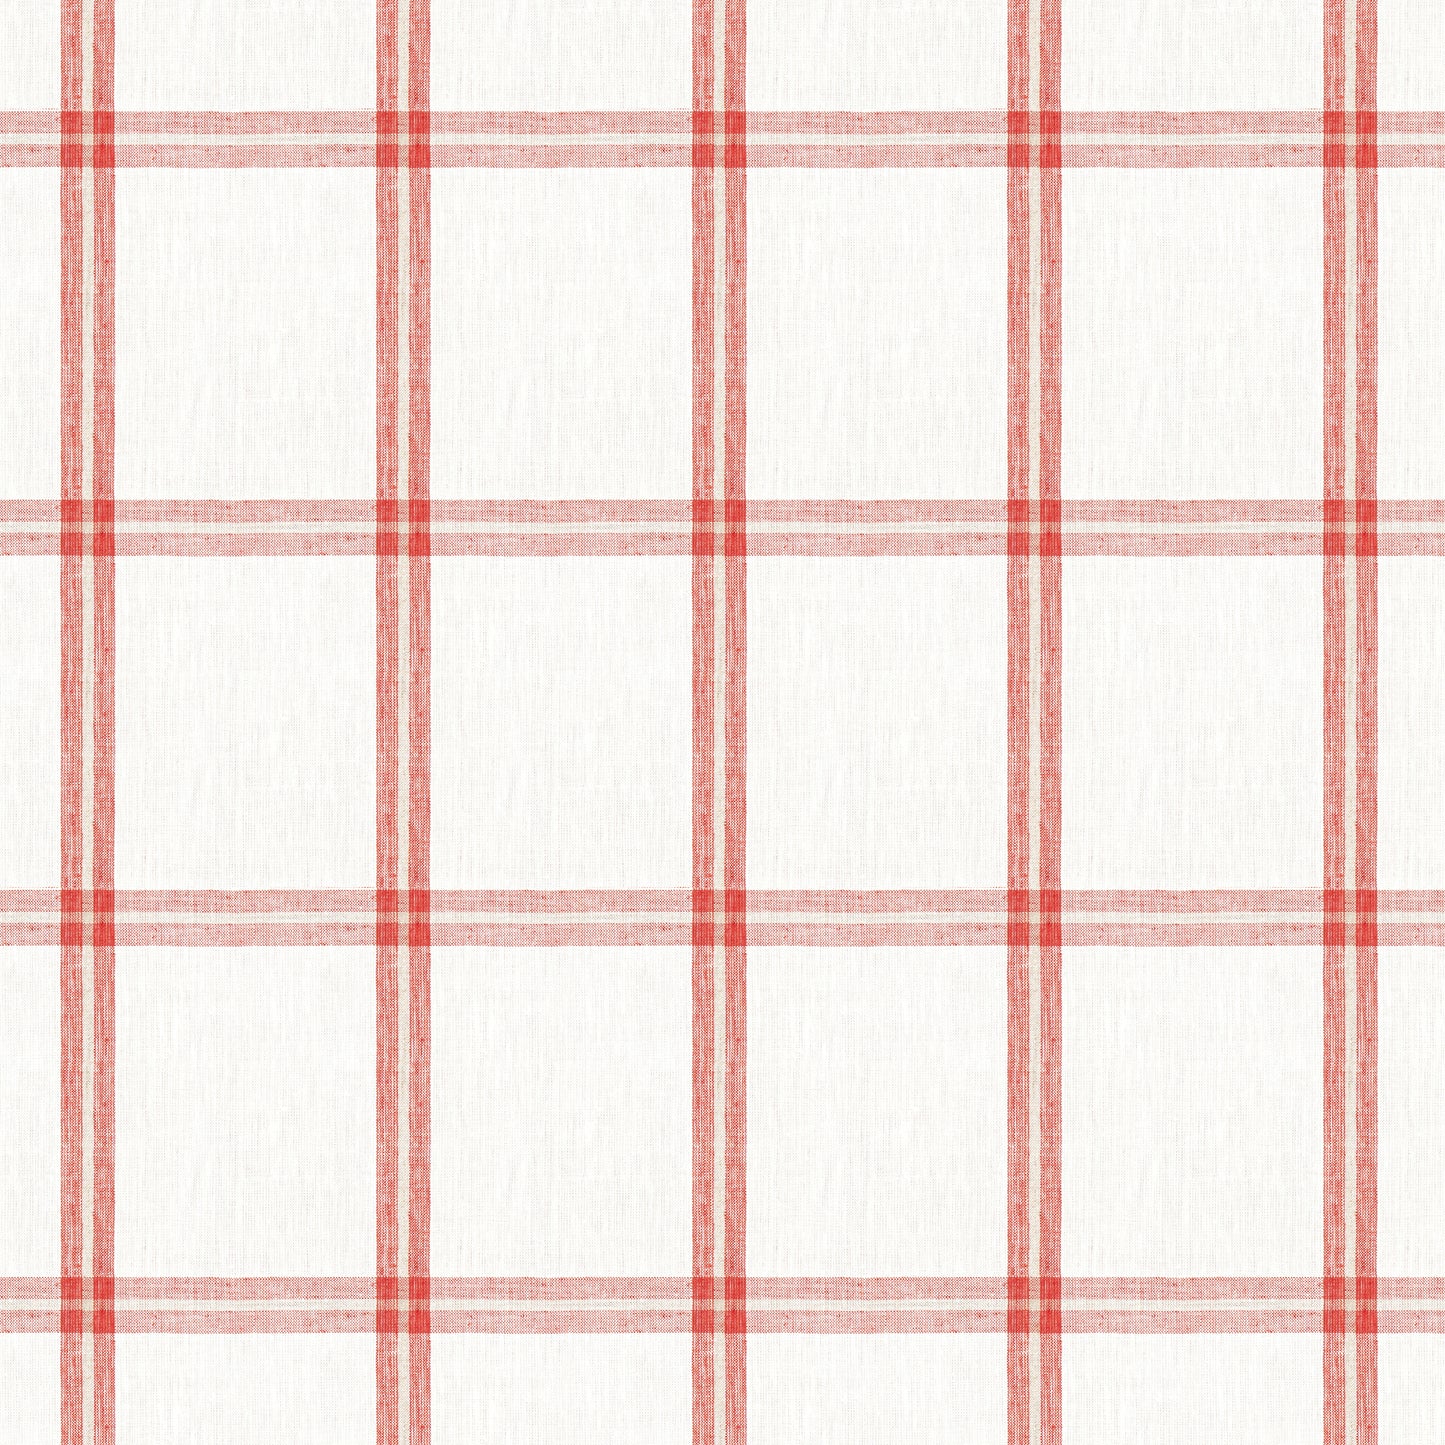 Purchase Thibaut Fabric Product W781334 pattern name Huntington Plaid color Sunbaked